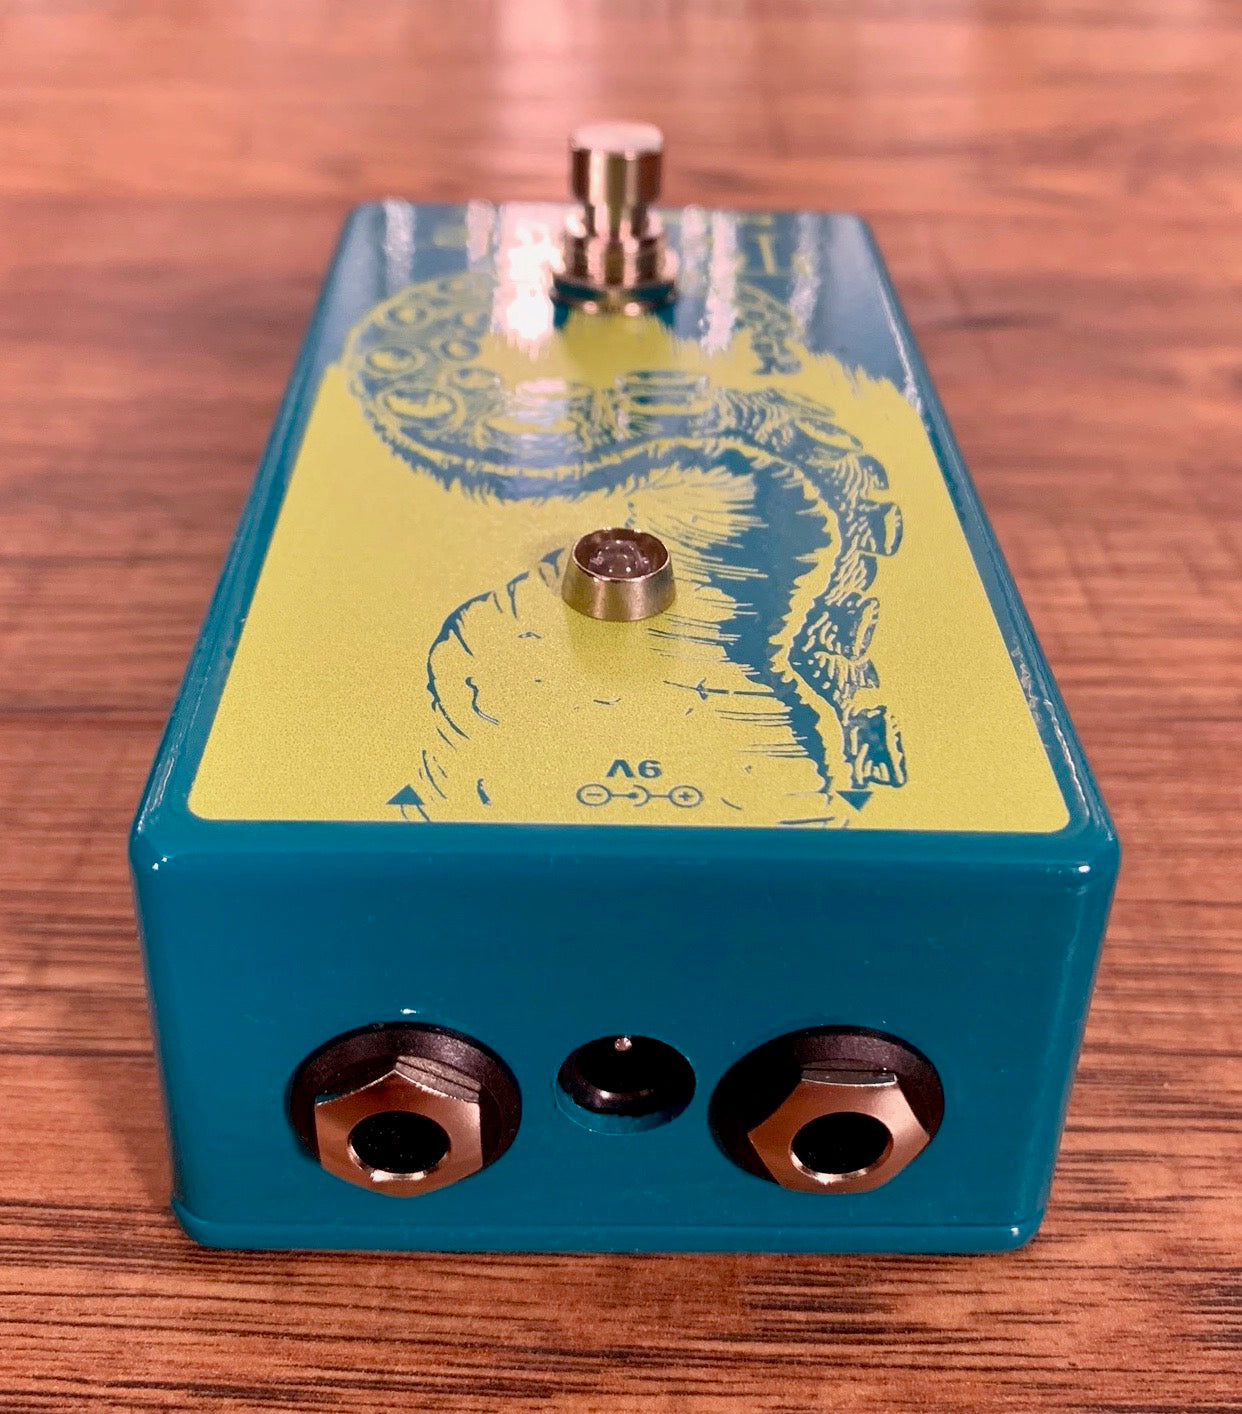 Earthquaker Devices EQD Tentacle Analog Octave Up V2 Guitar Effect Pedal